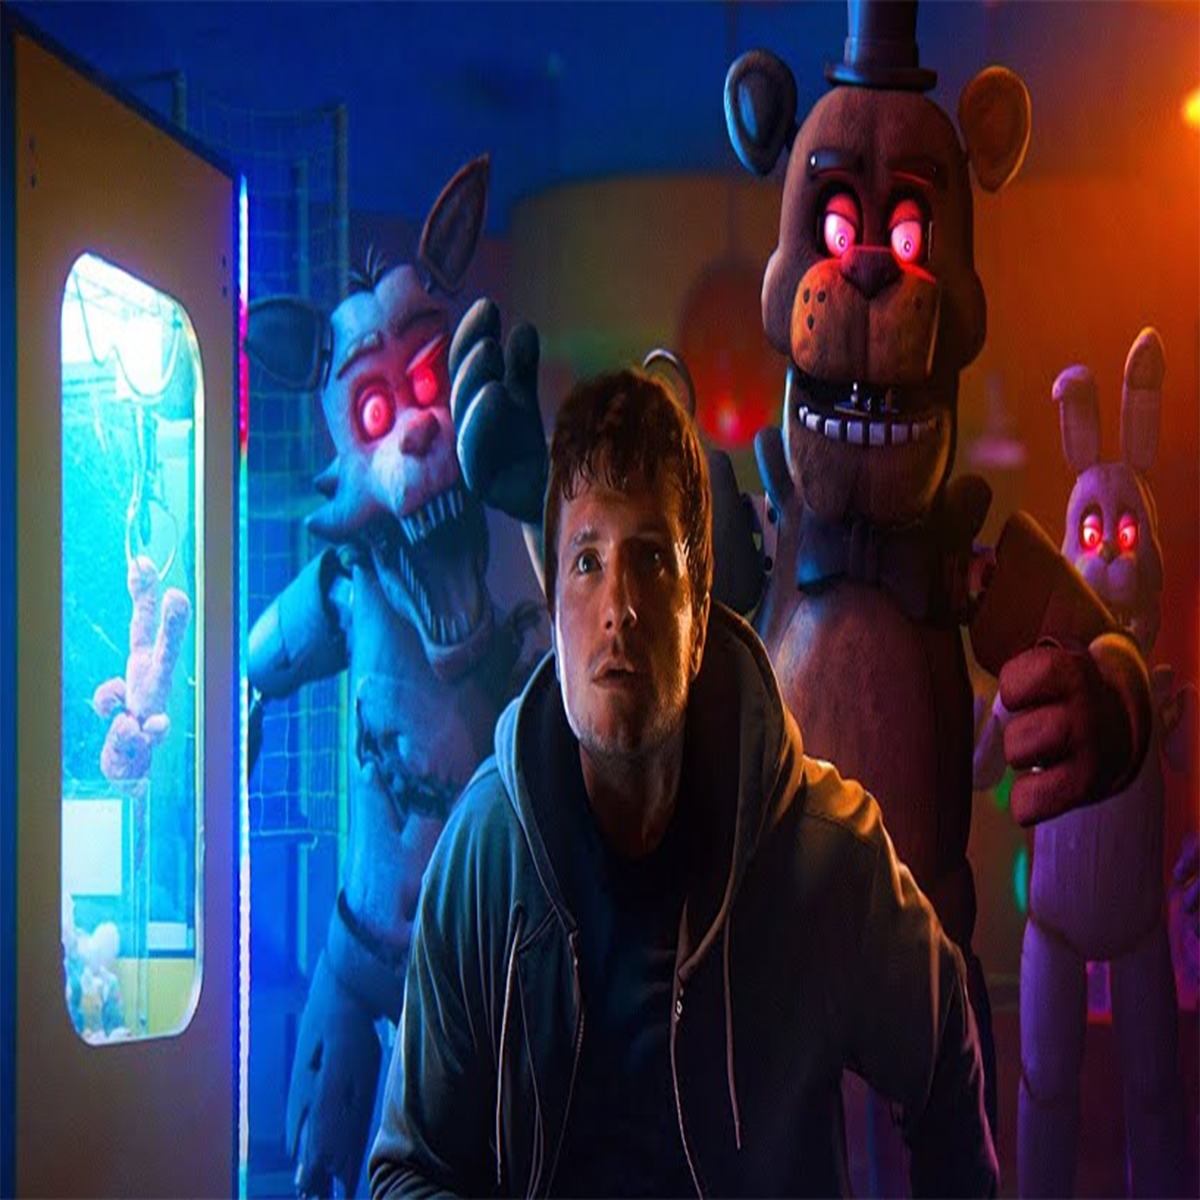 Five Nights At Freddy's 2 – FULL FINAL TRAILER (2024) Universal Pictures 